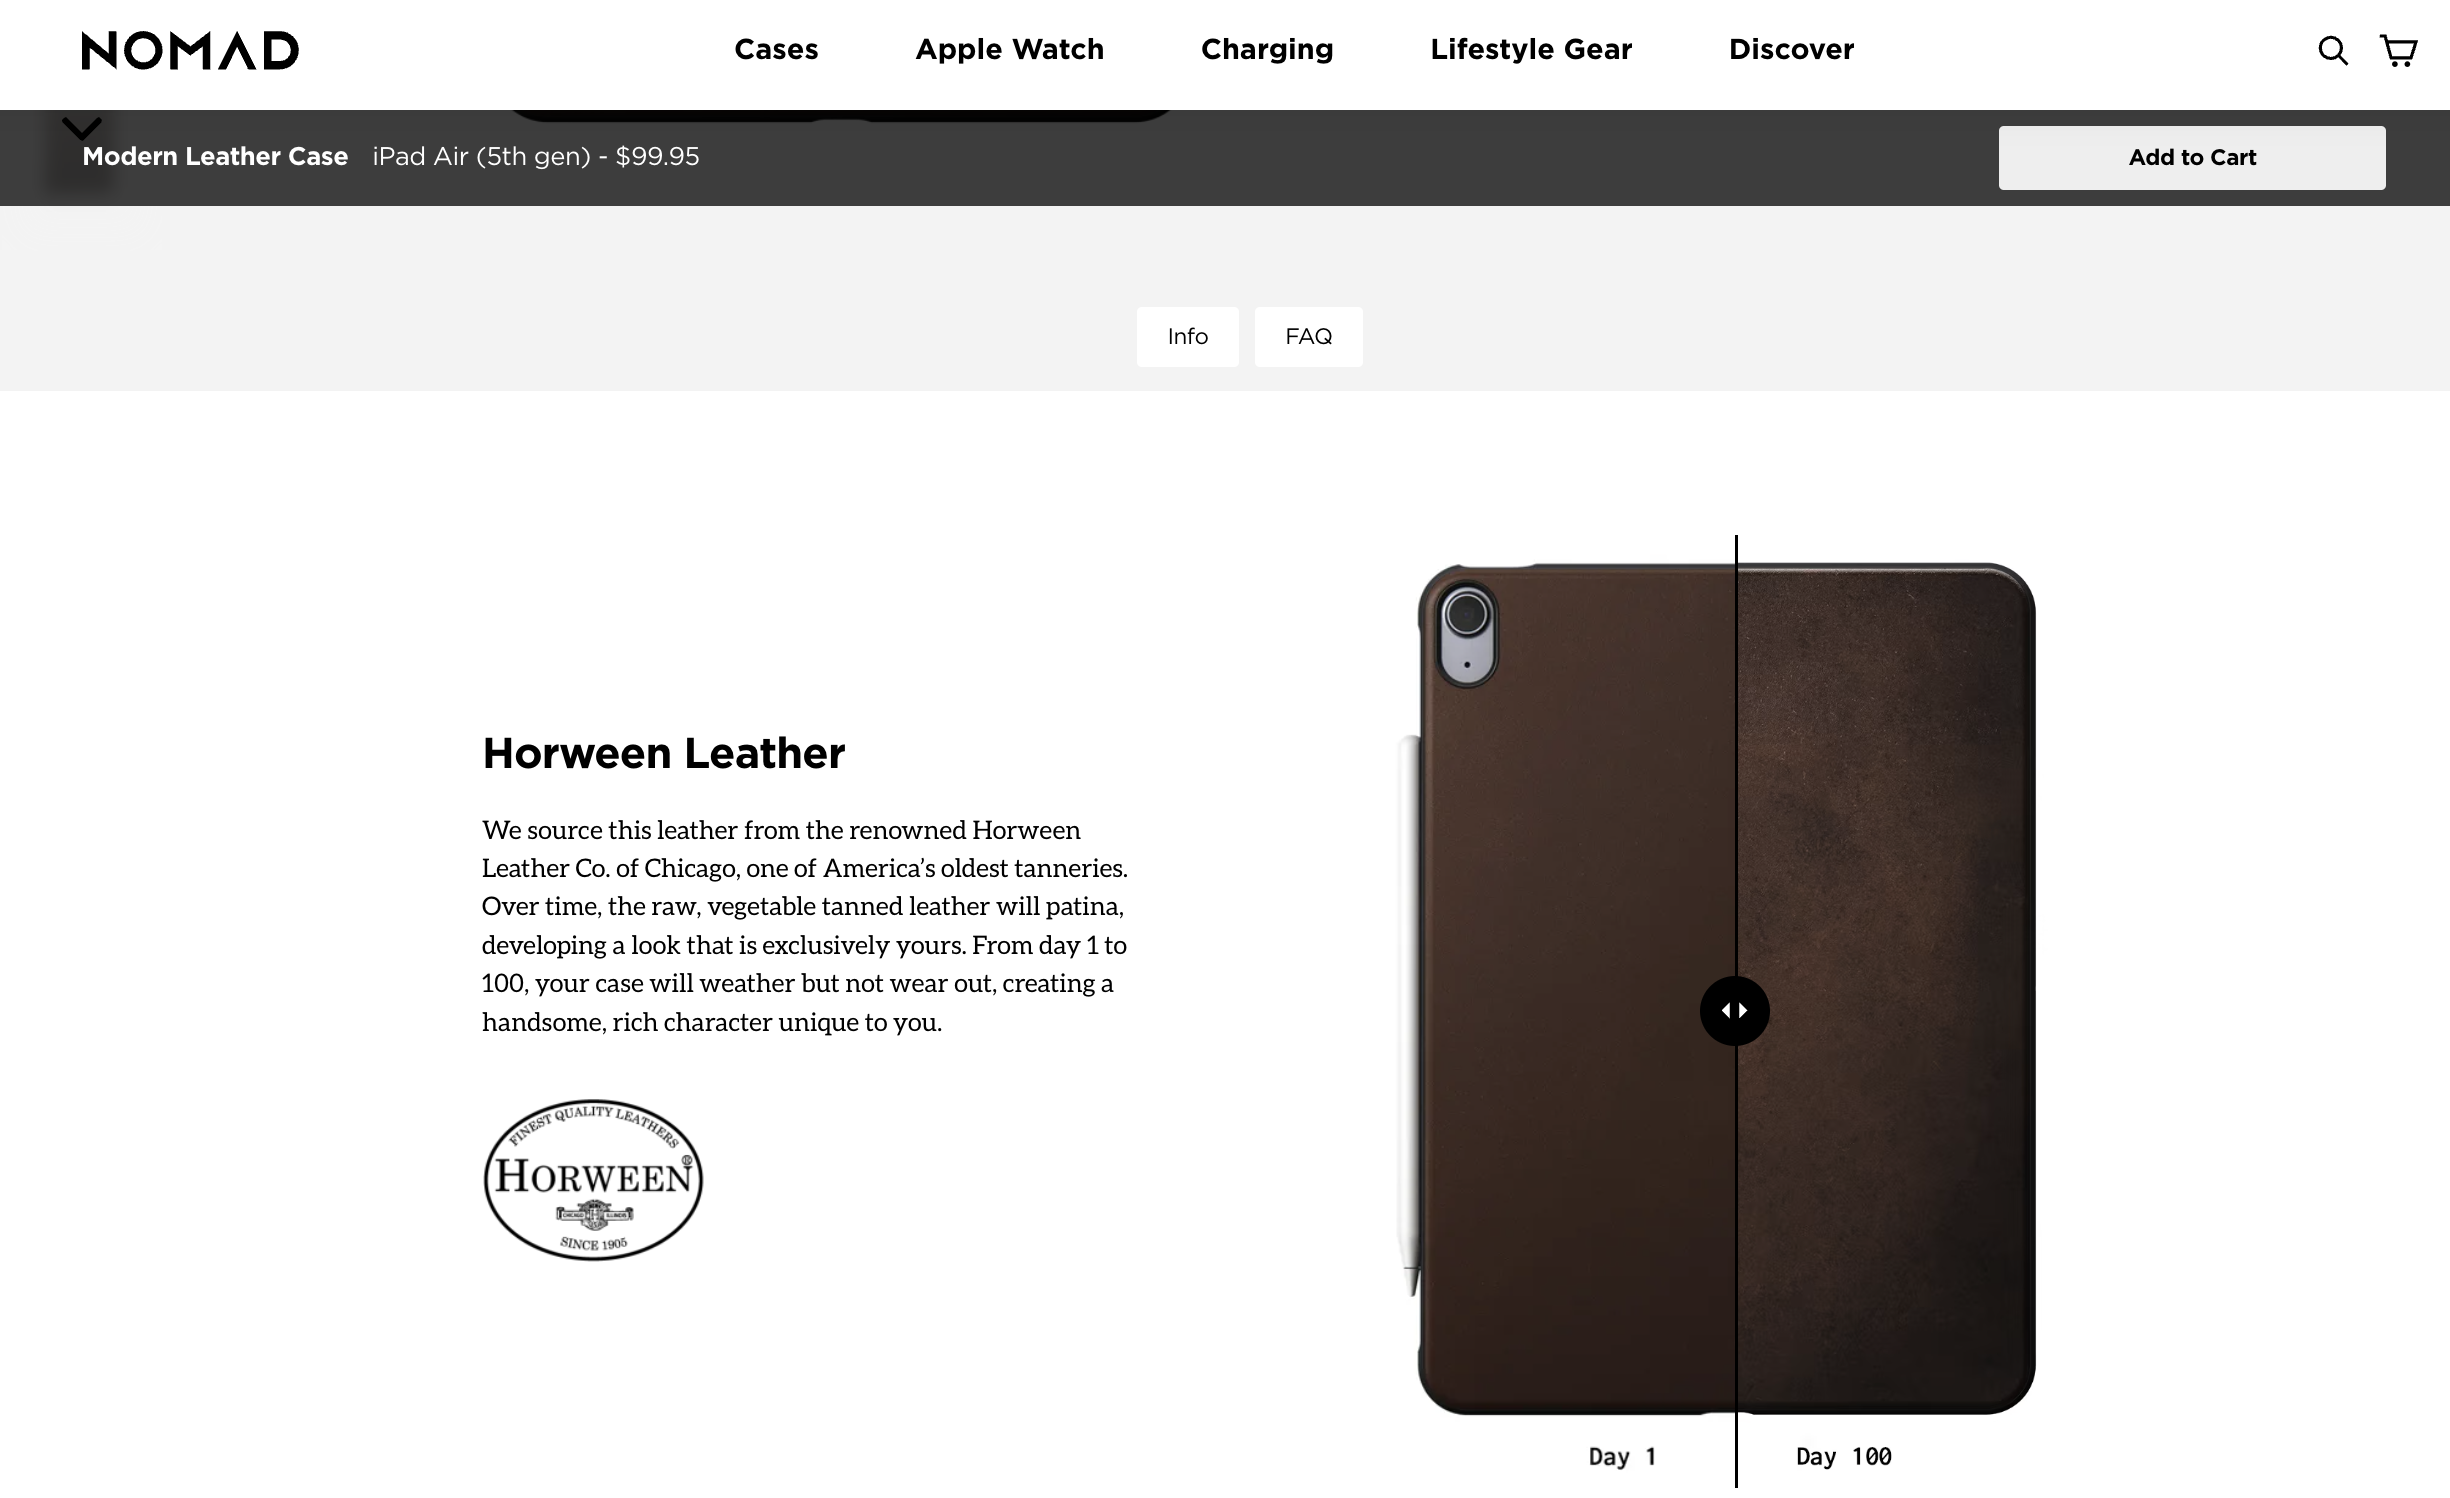 Product page for the Modern Leather Case on Nomad.com